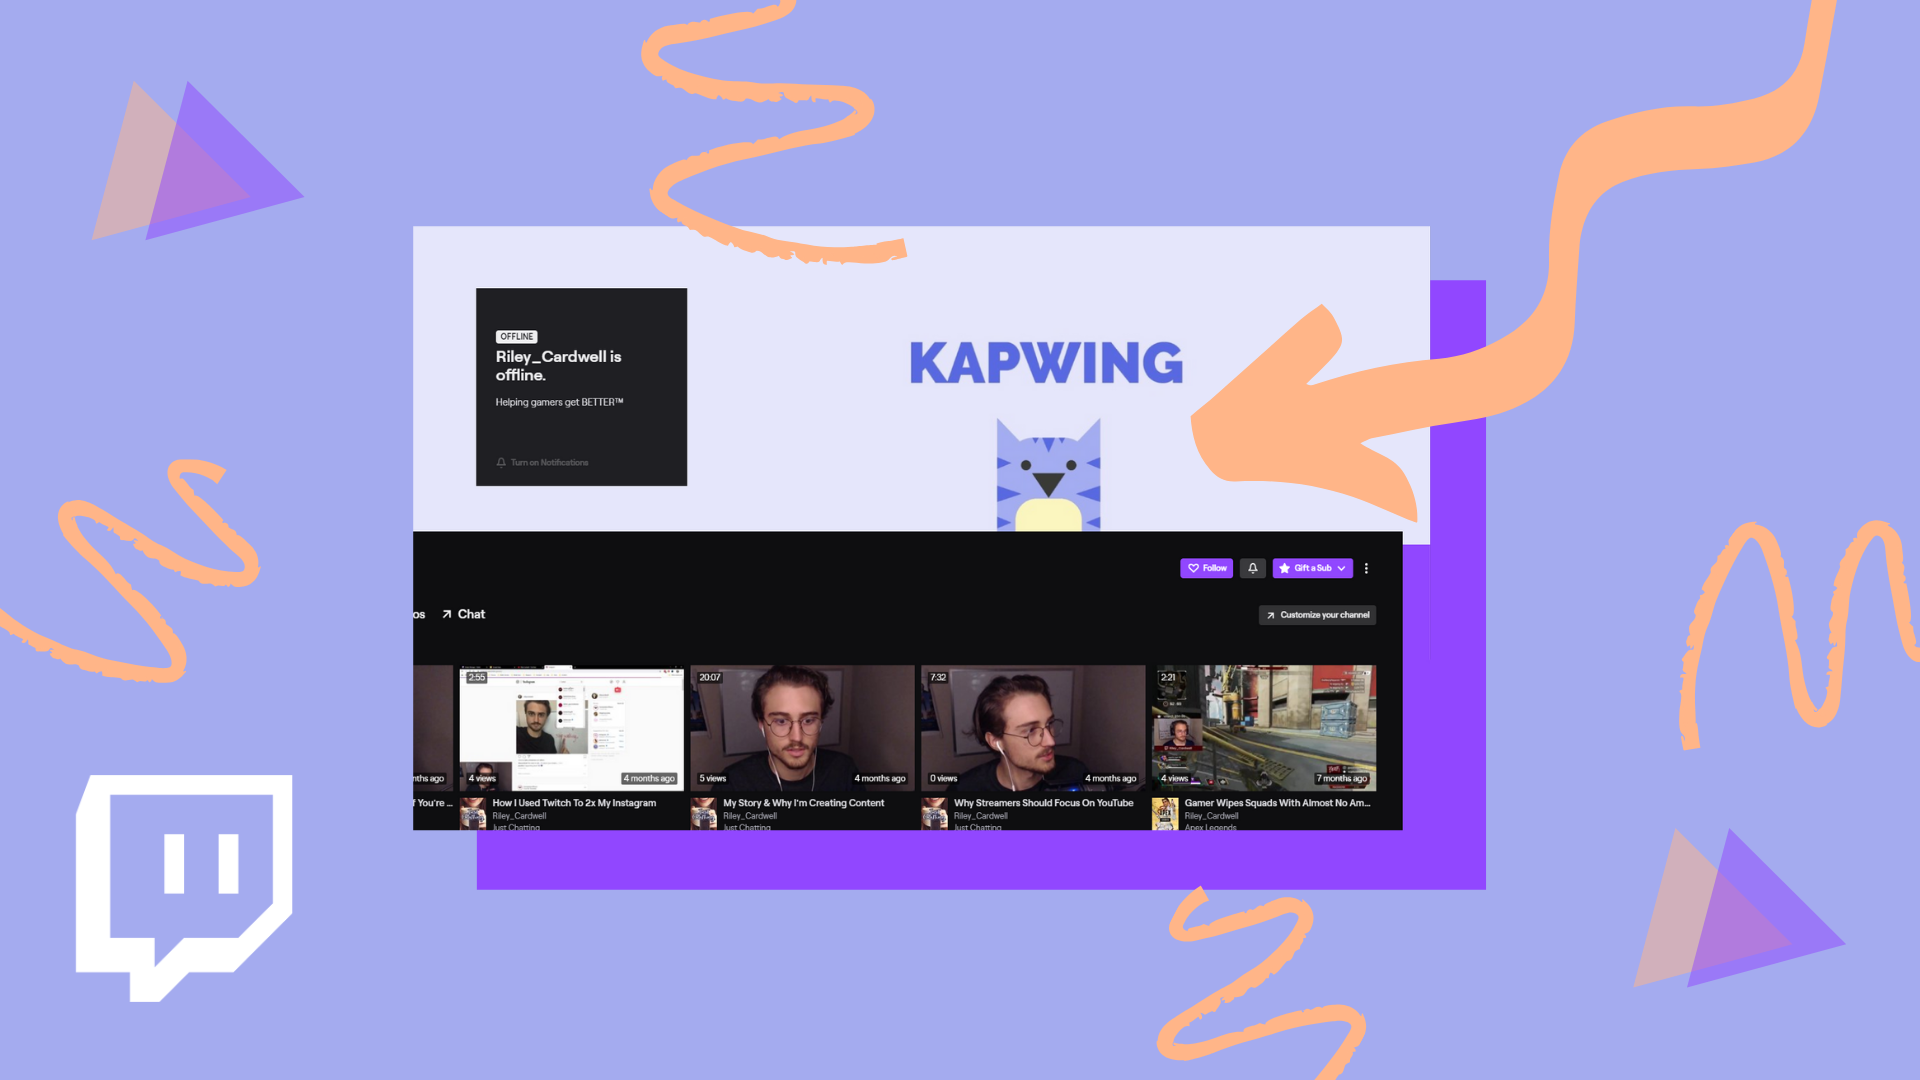 How To Make A Twitch Banner Image